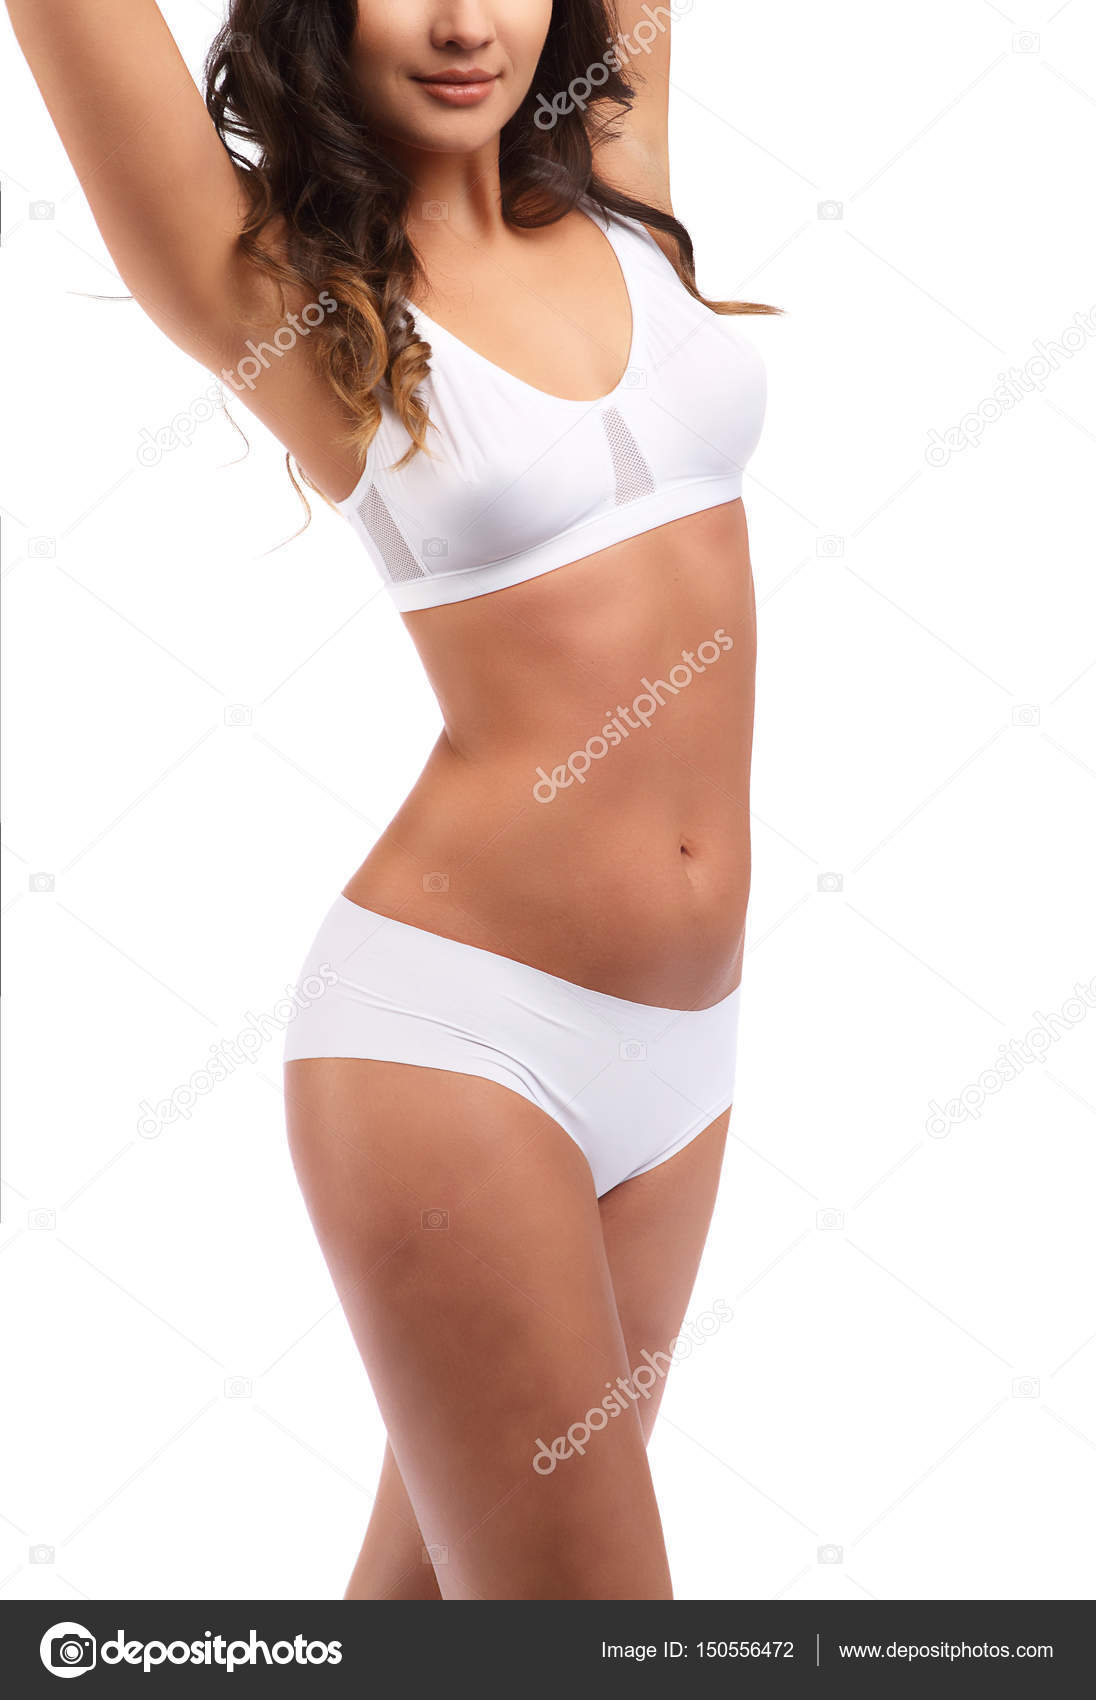 Woman standing in white cotton panties and bra isolated on white